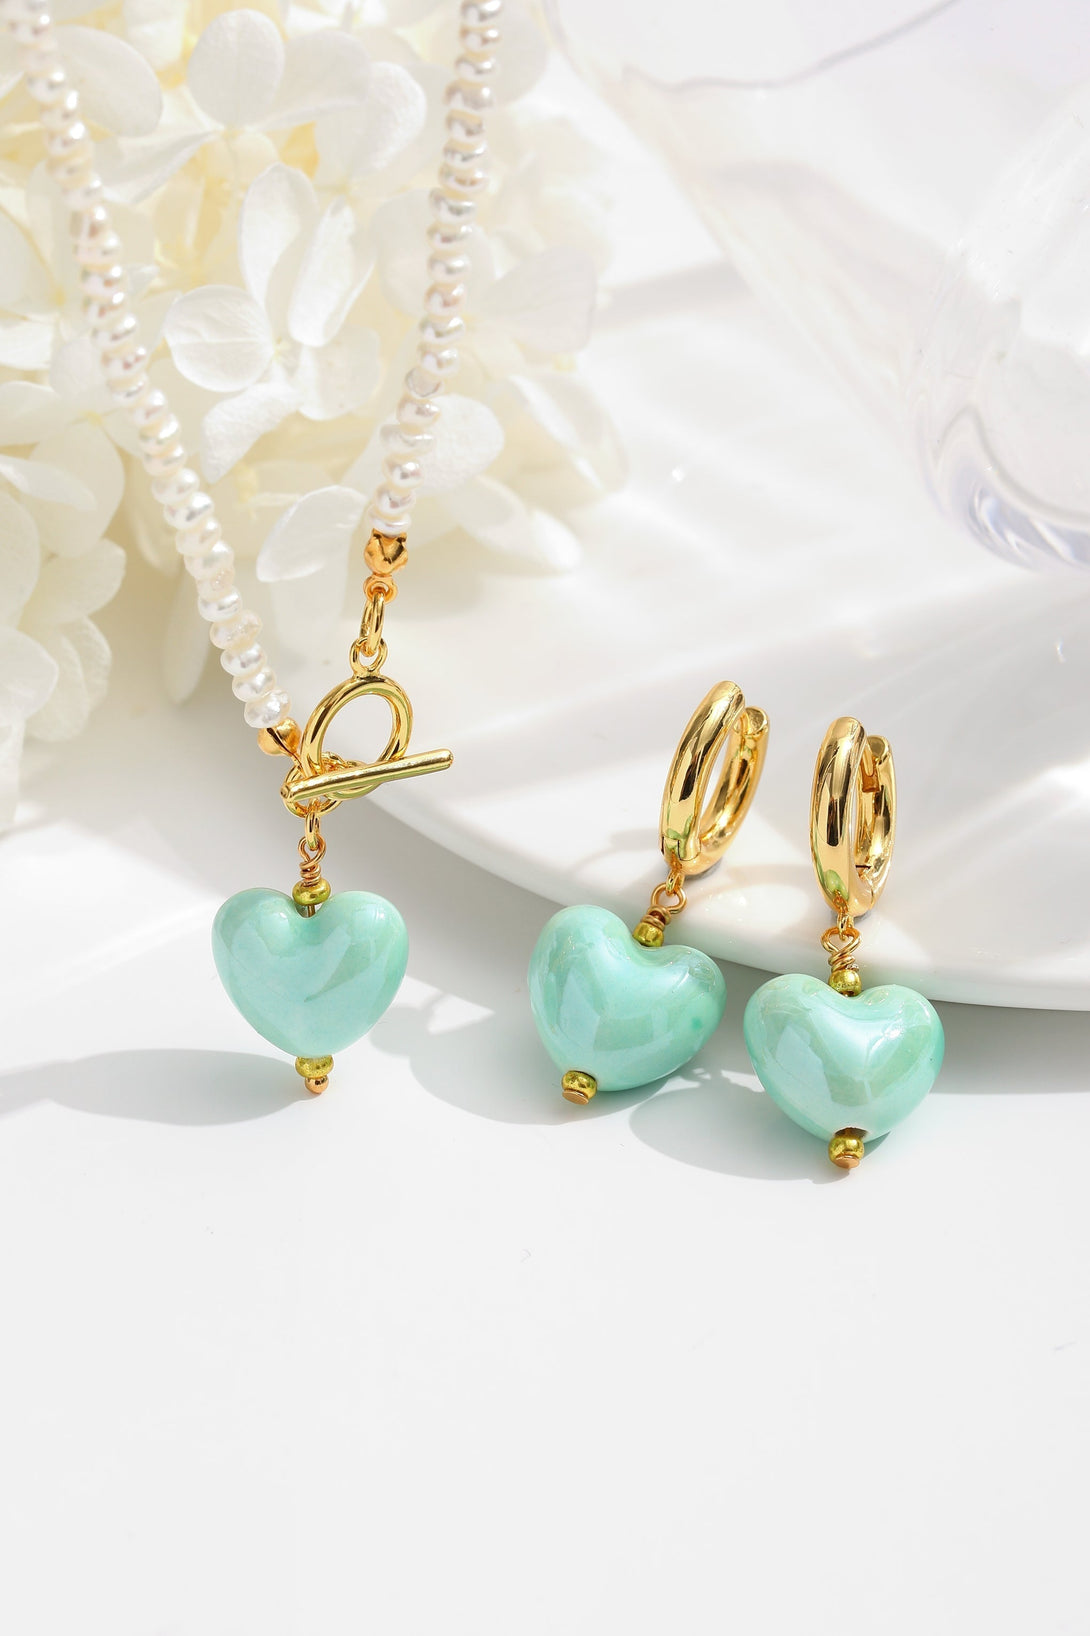 Green Ceramic Heart Pendant Pearl Necklace - Classicharms